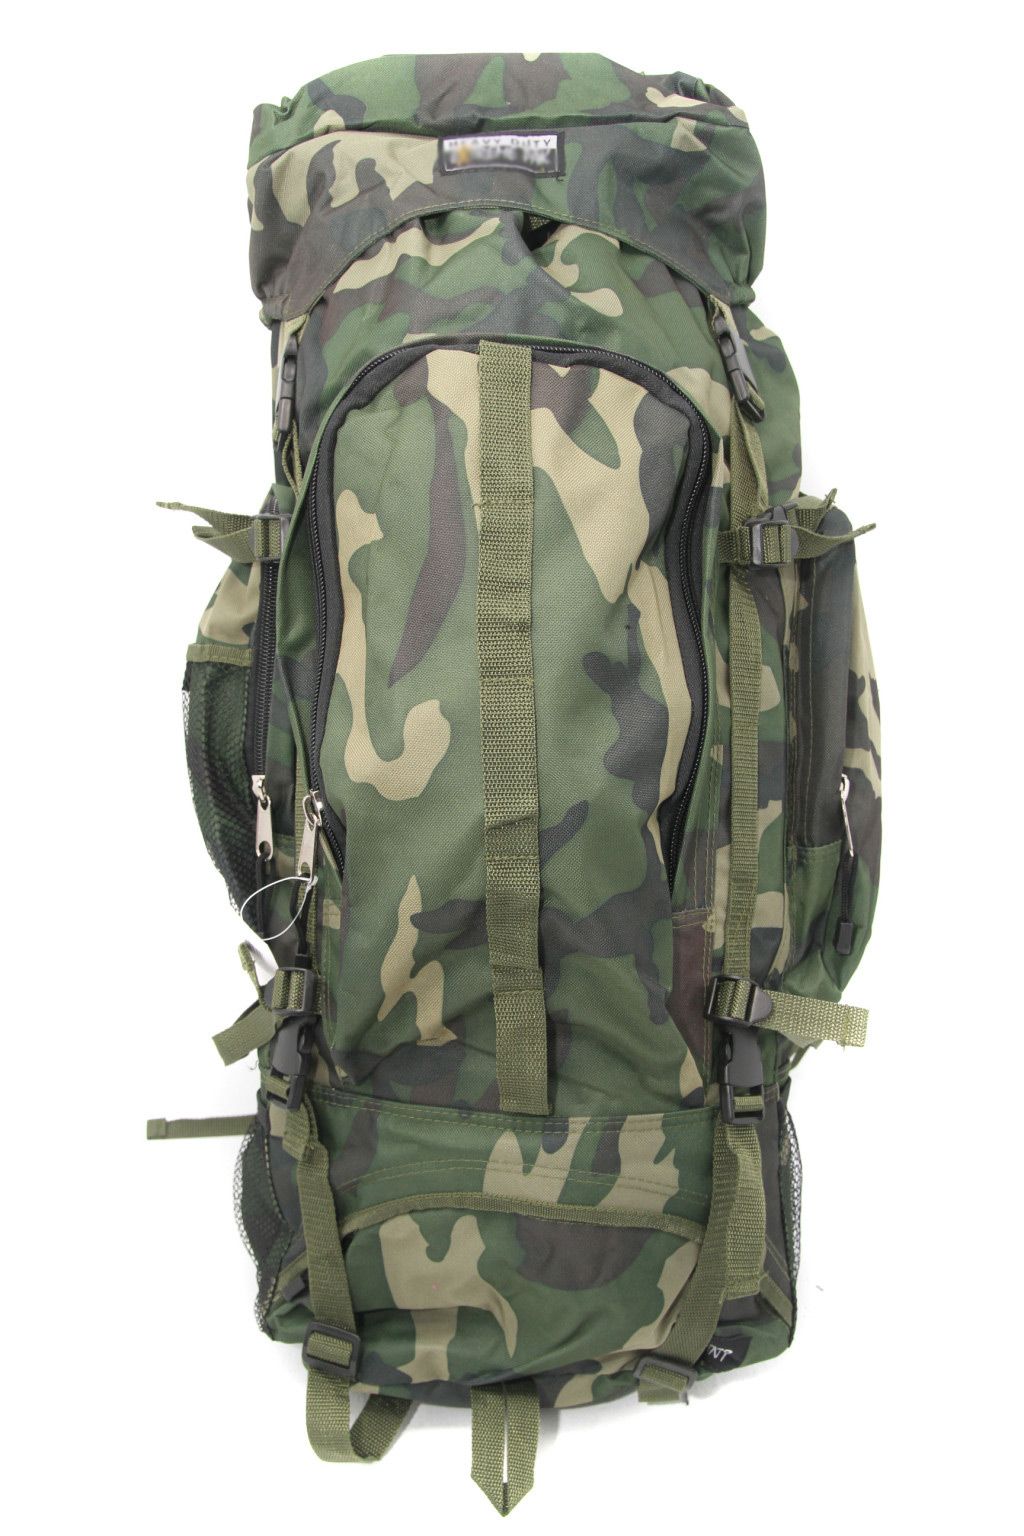 Big Camo Backpack for Camping Hiking Camouflage Designs 2 Camo Styles 